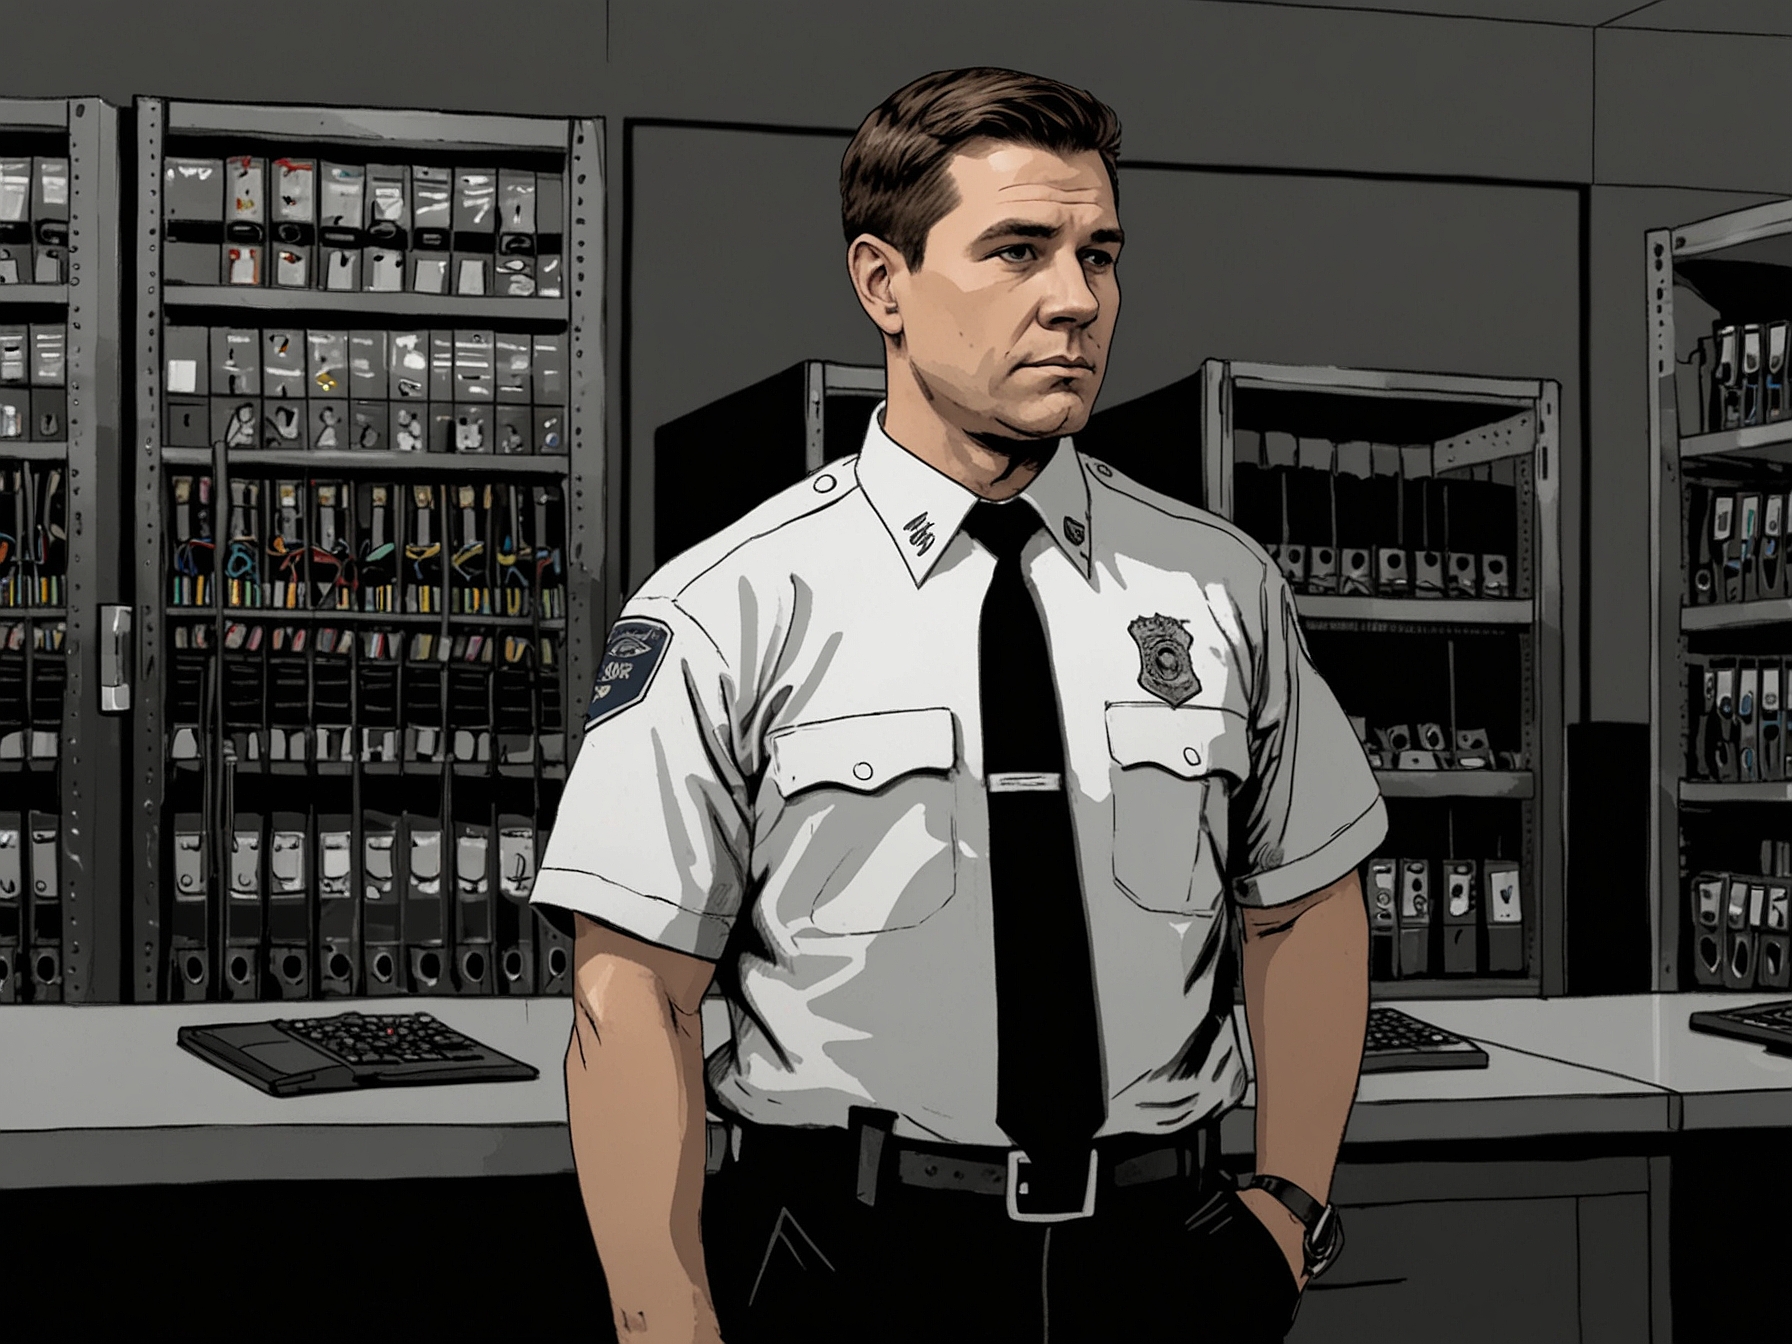 A law enforcement officer stands by a server rack, symbolizing the extensive cyber forensic investigation that led to the conviction of five men running an illegal streaming service.